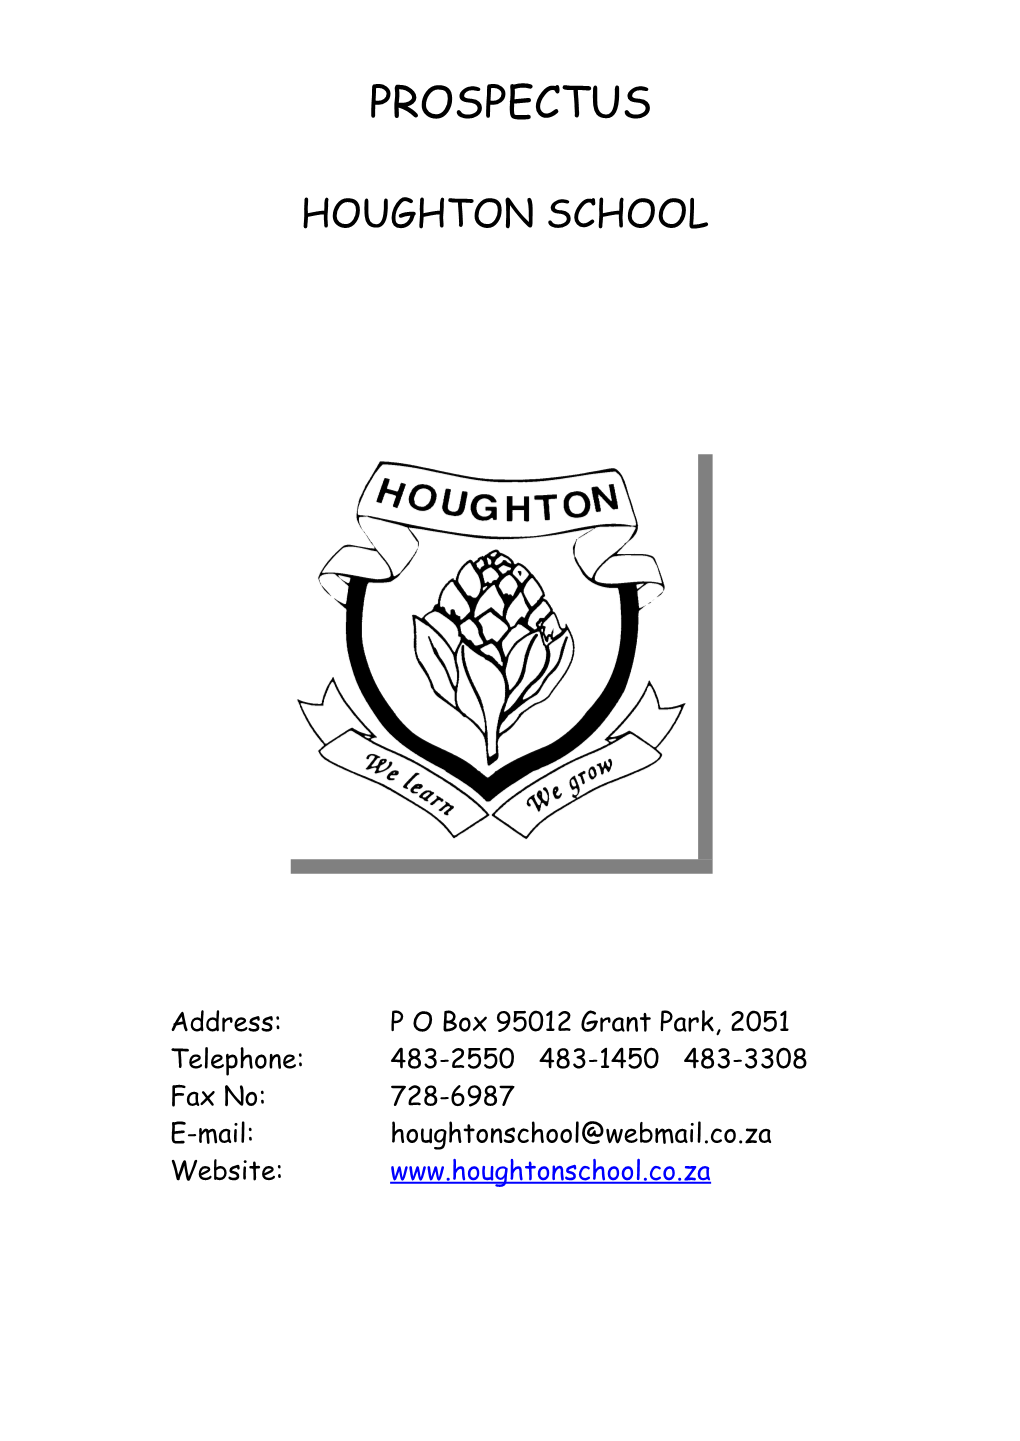 My Staff and I Bid Your Child a Very Warm WELCOME to HOUGHTONSCHOOL